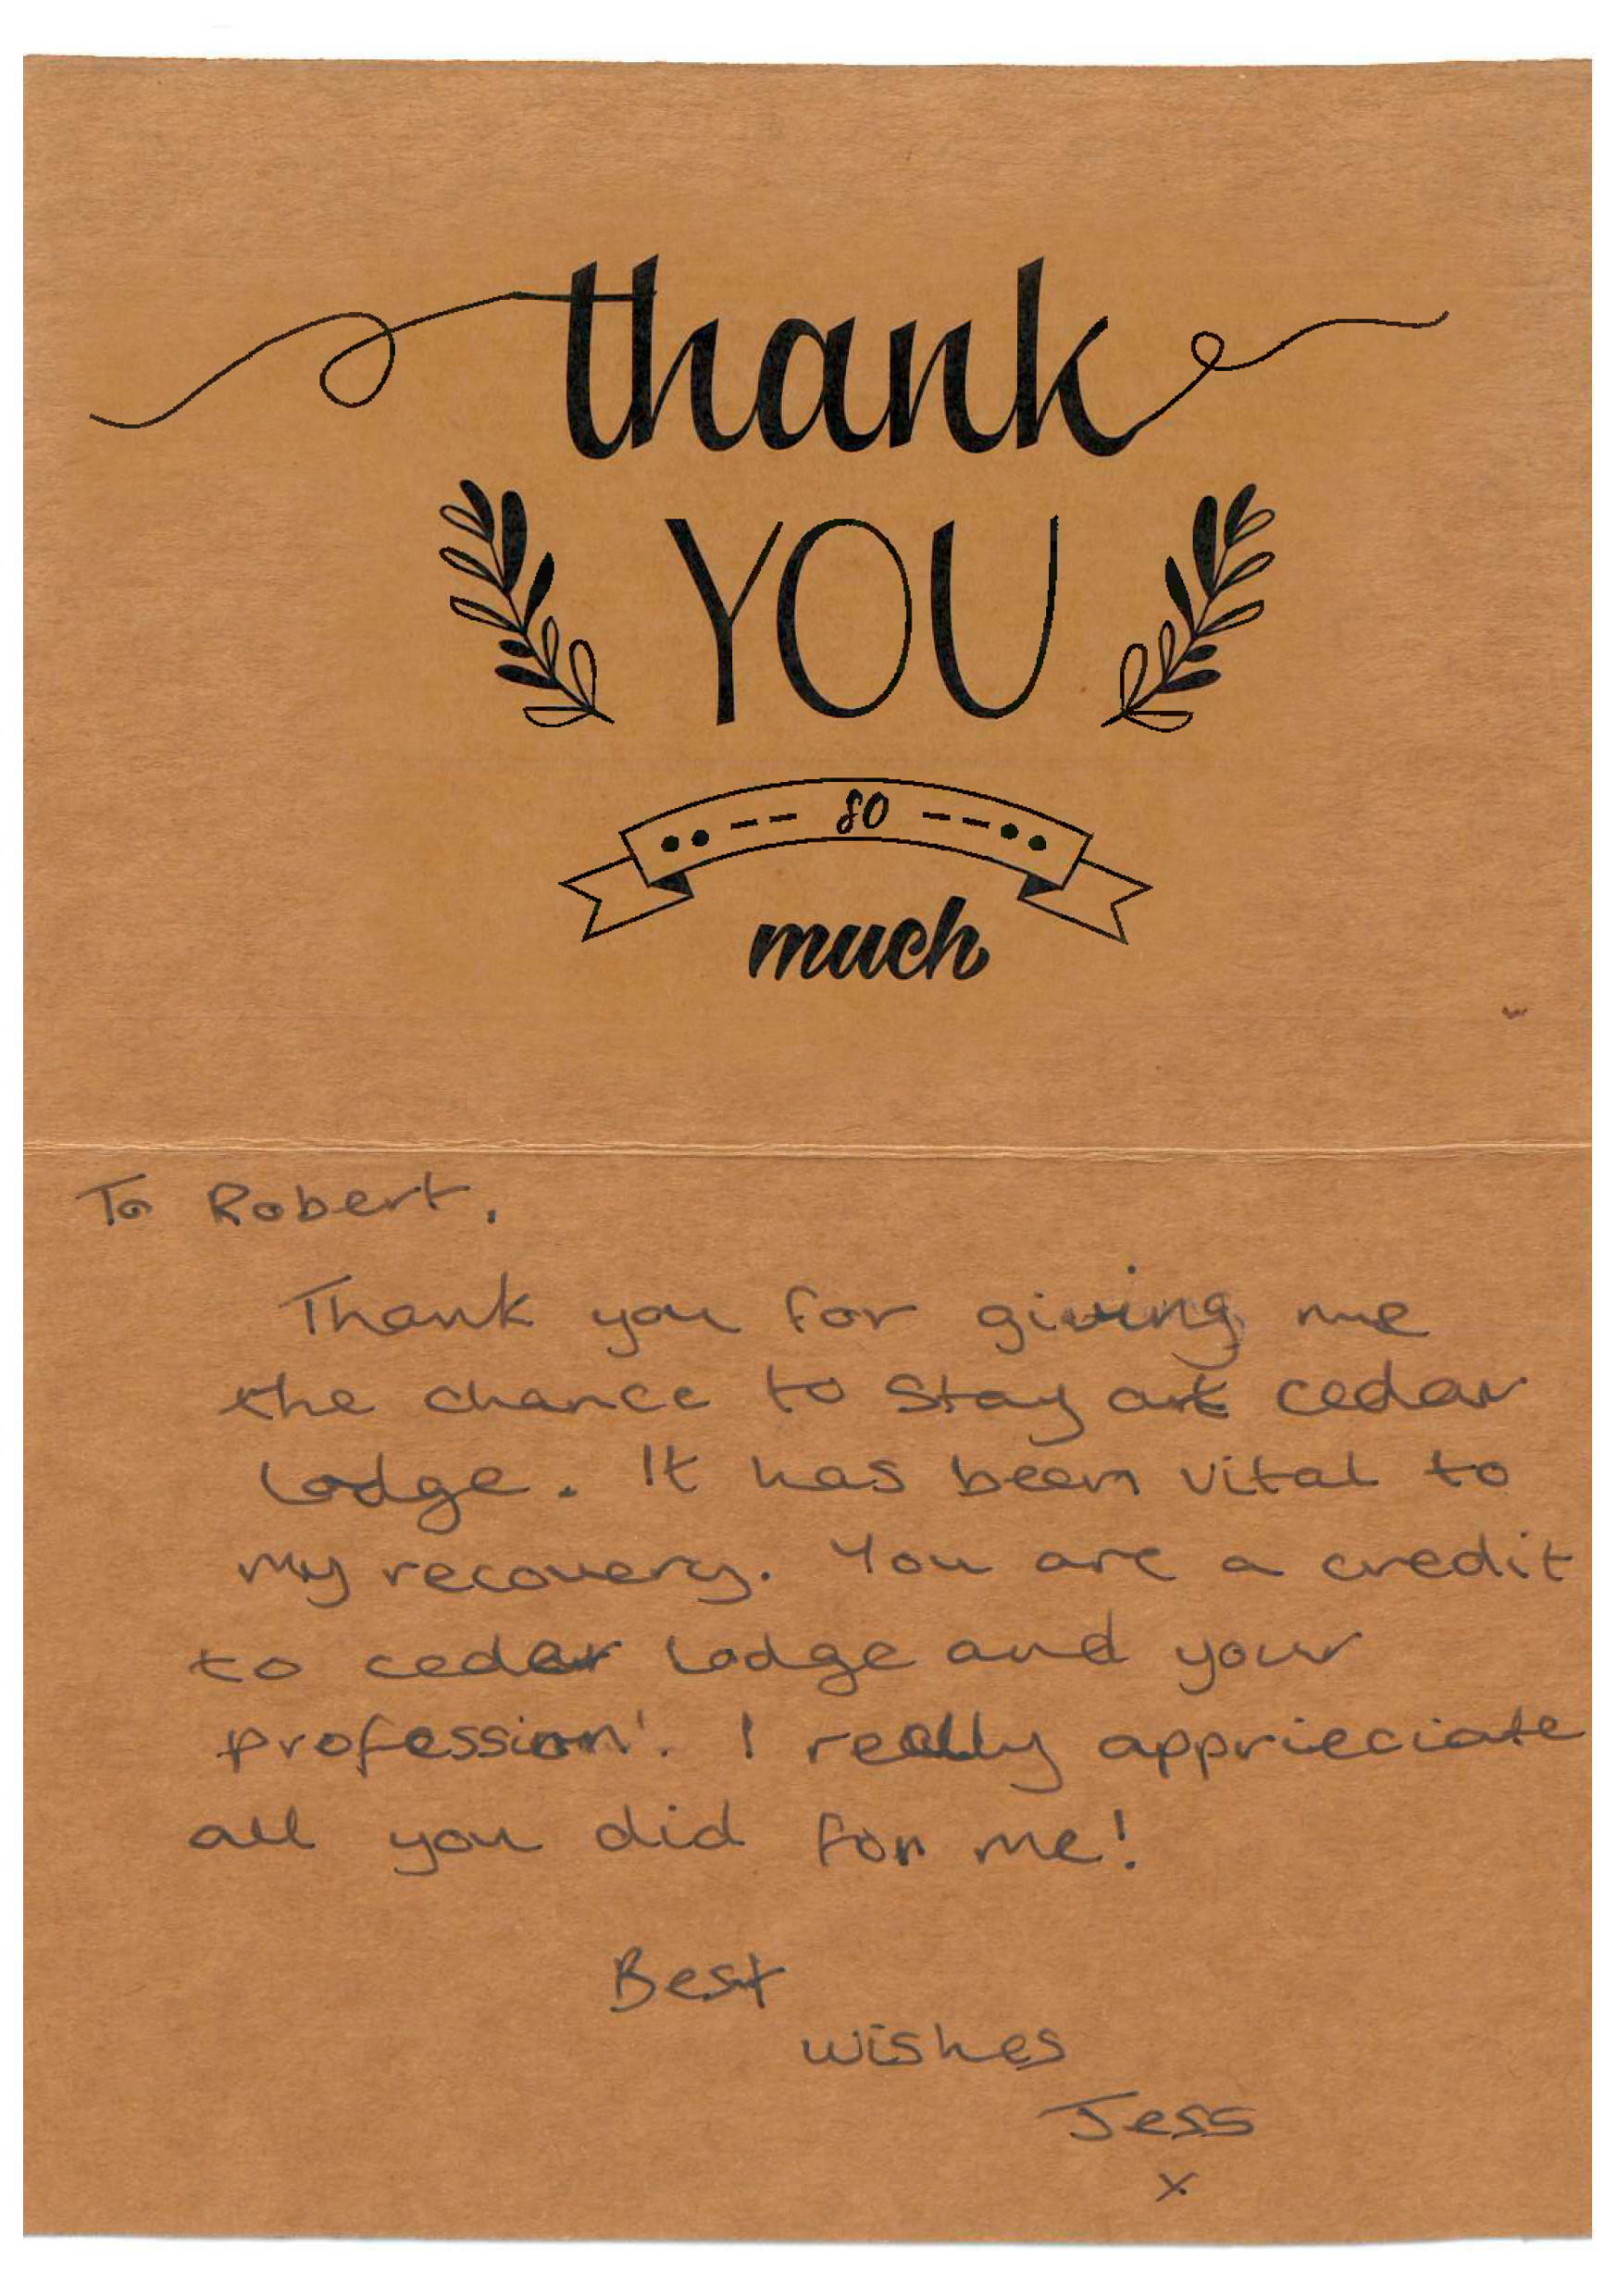 
Thank you note from a former resident - News & Events